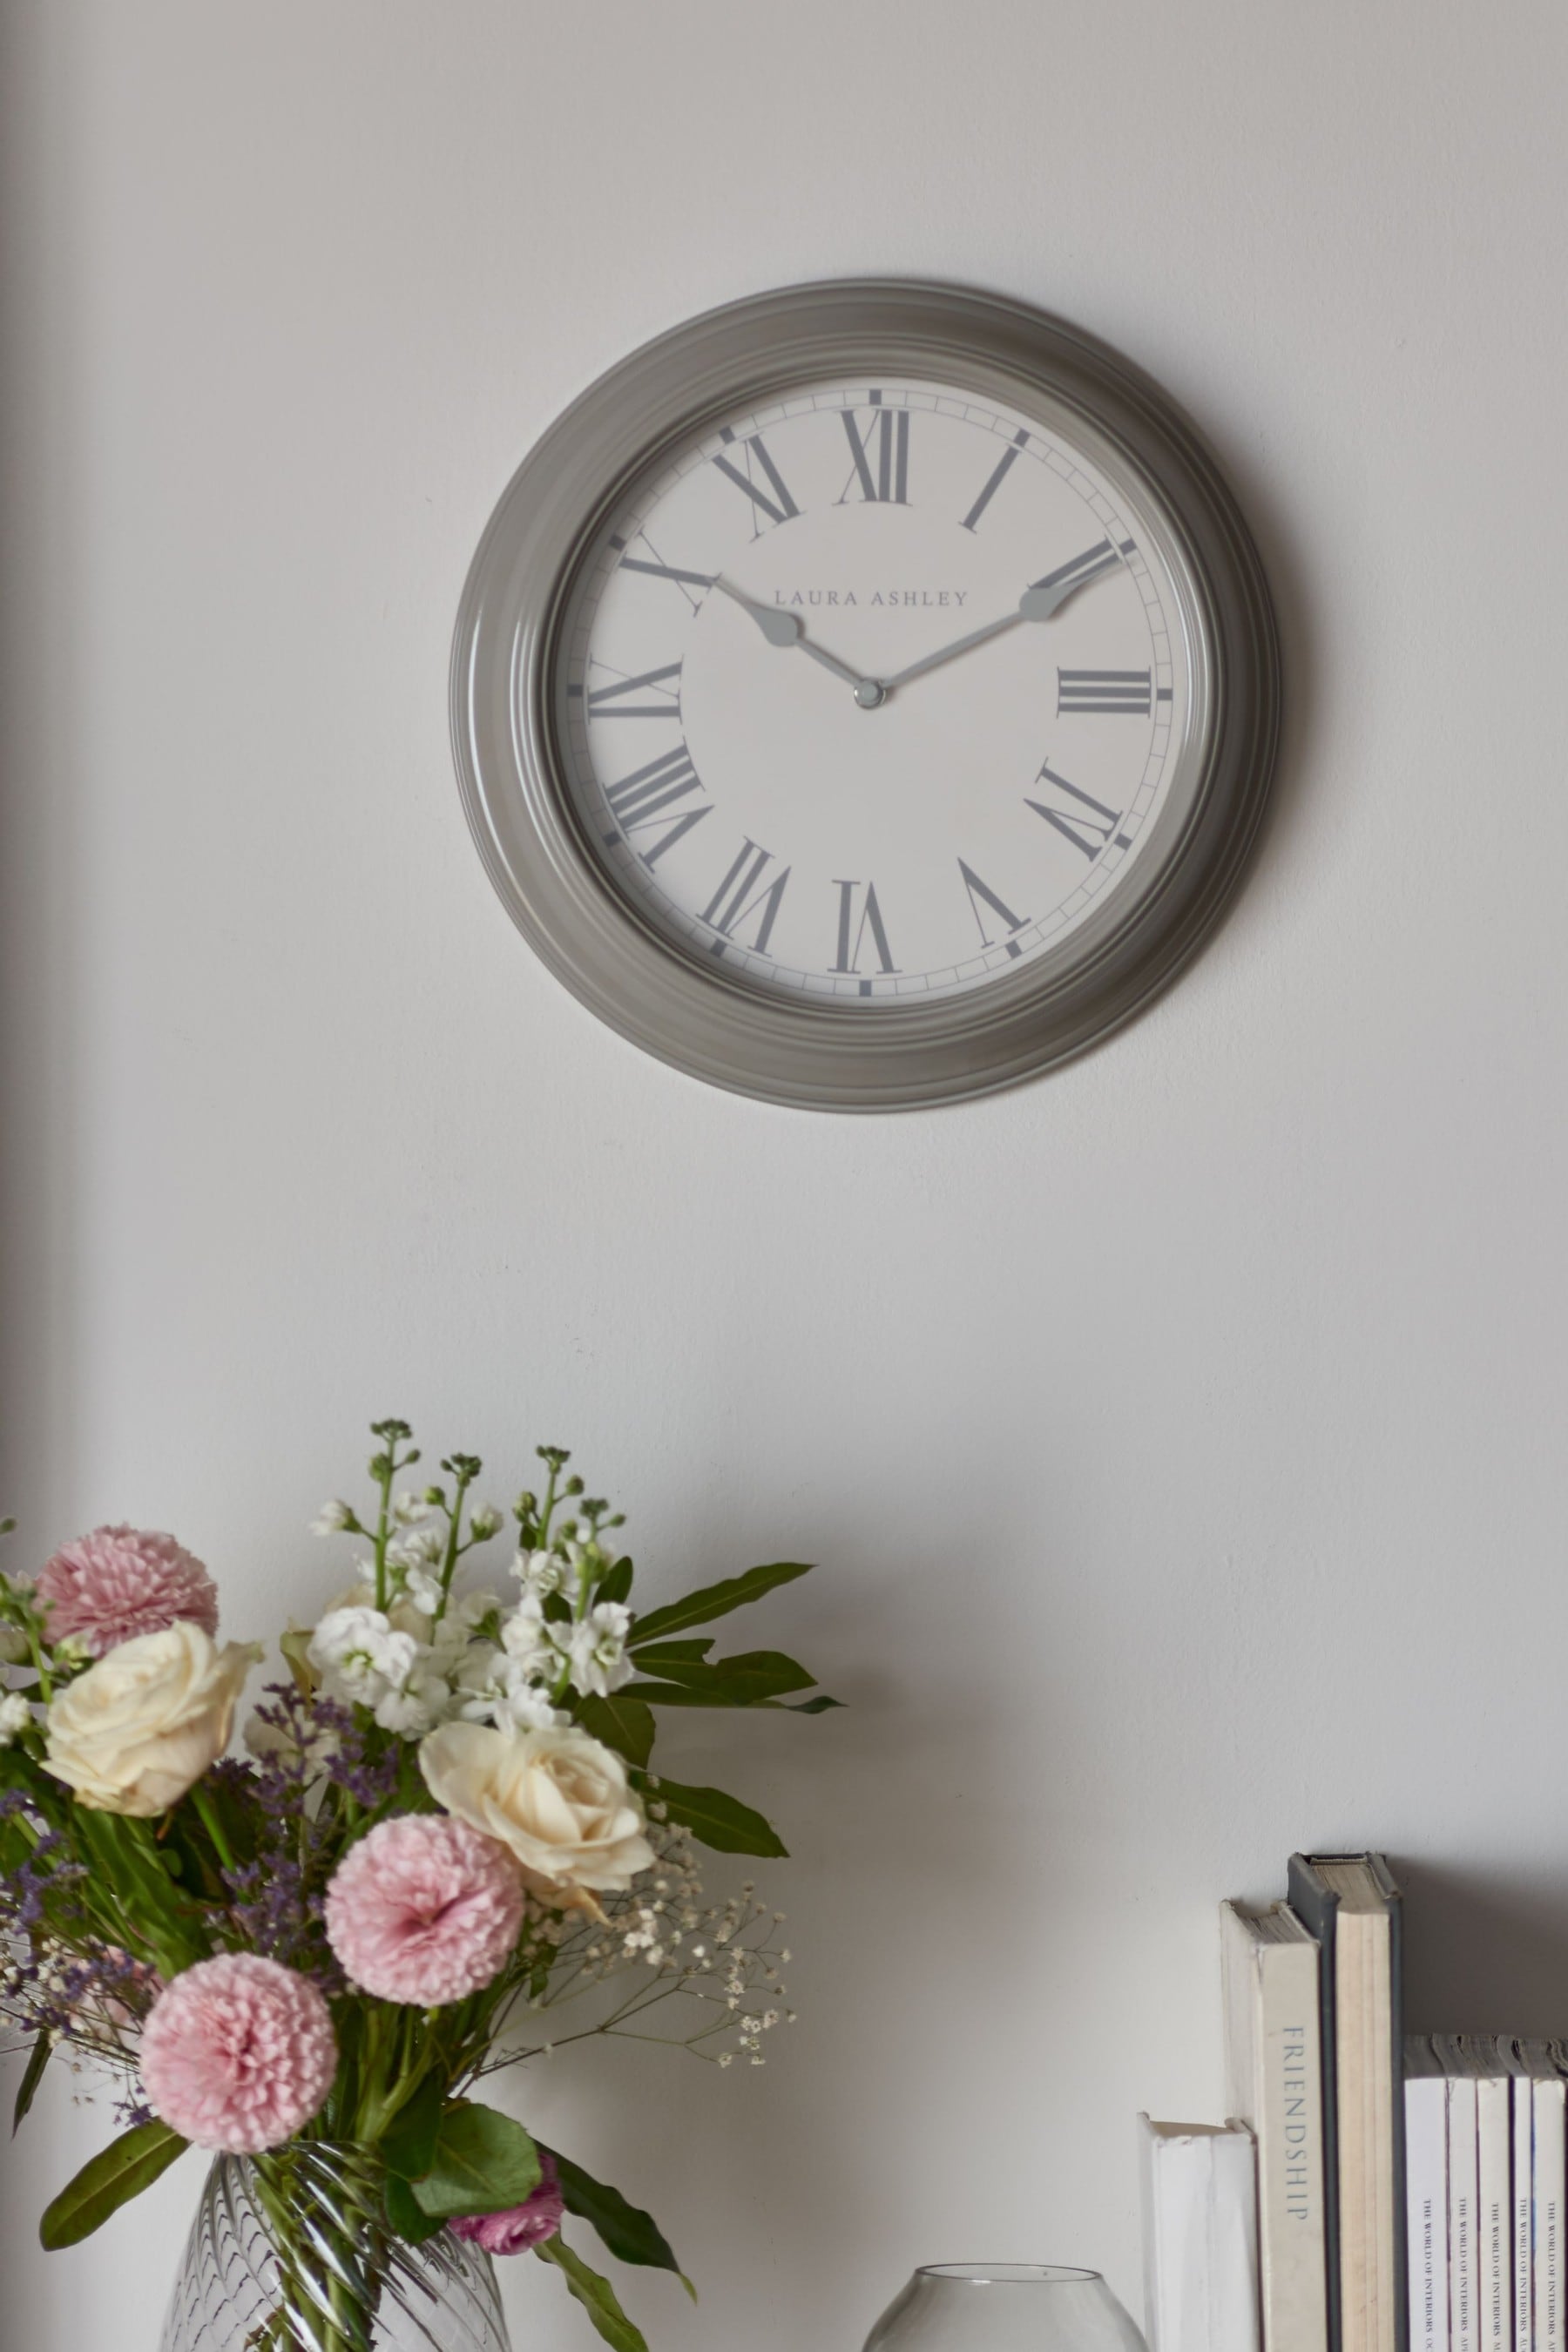 Buy Laura Ashley Gallery Wall Clock from the Next UK online shop